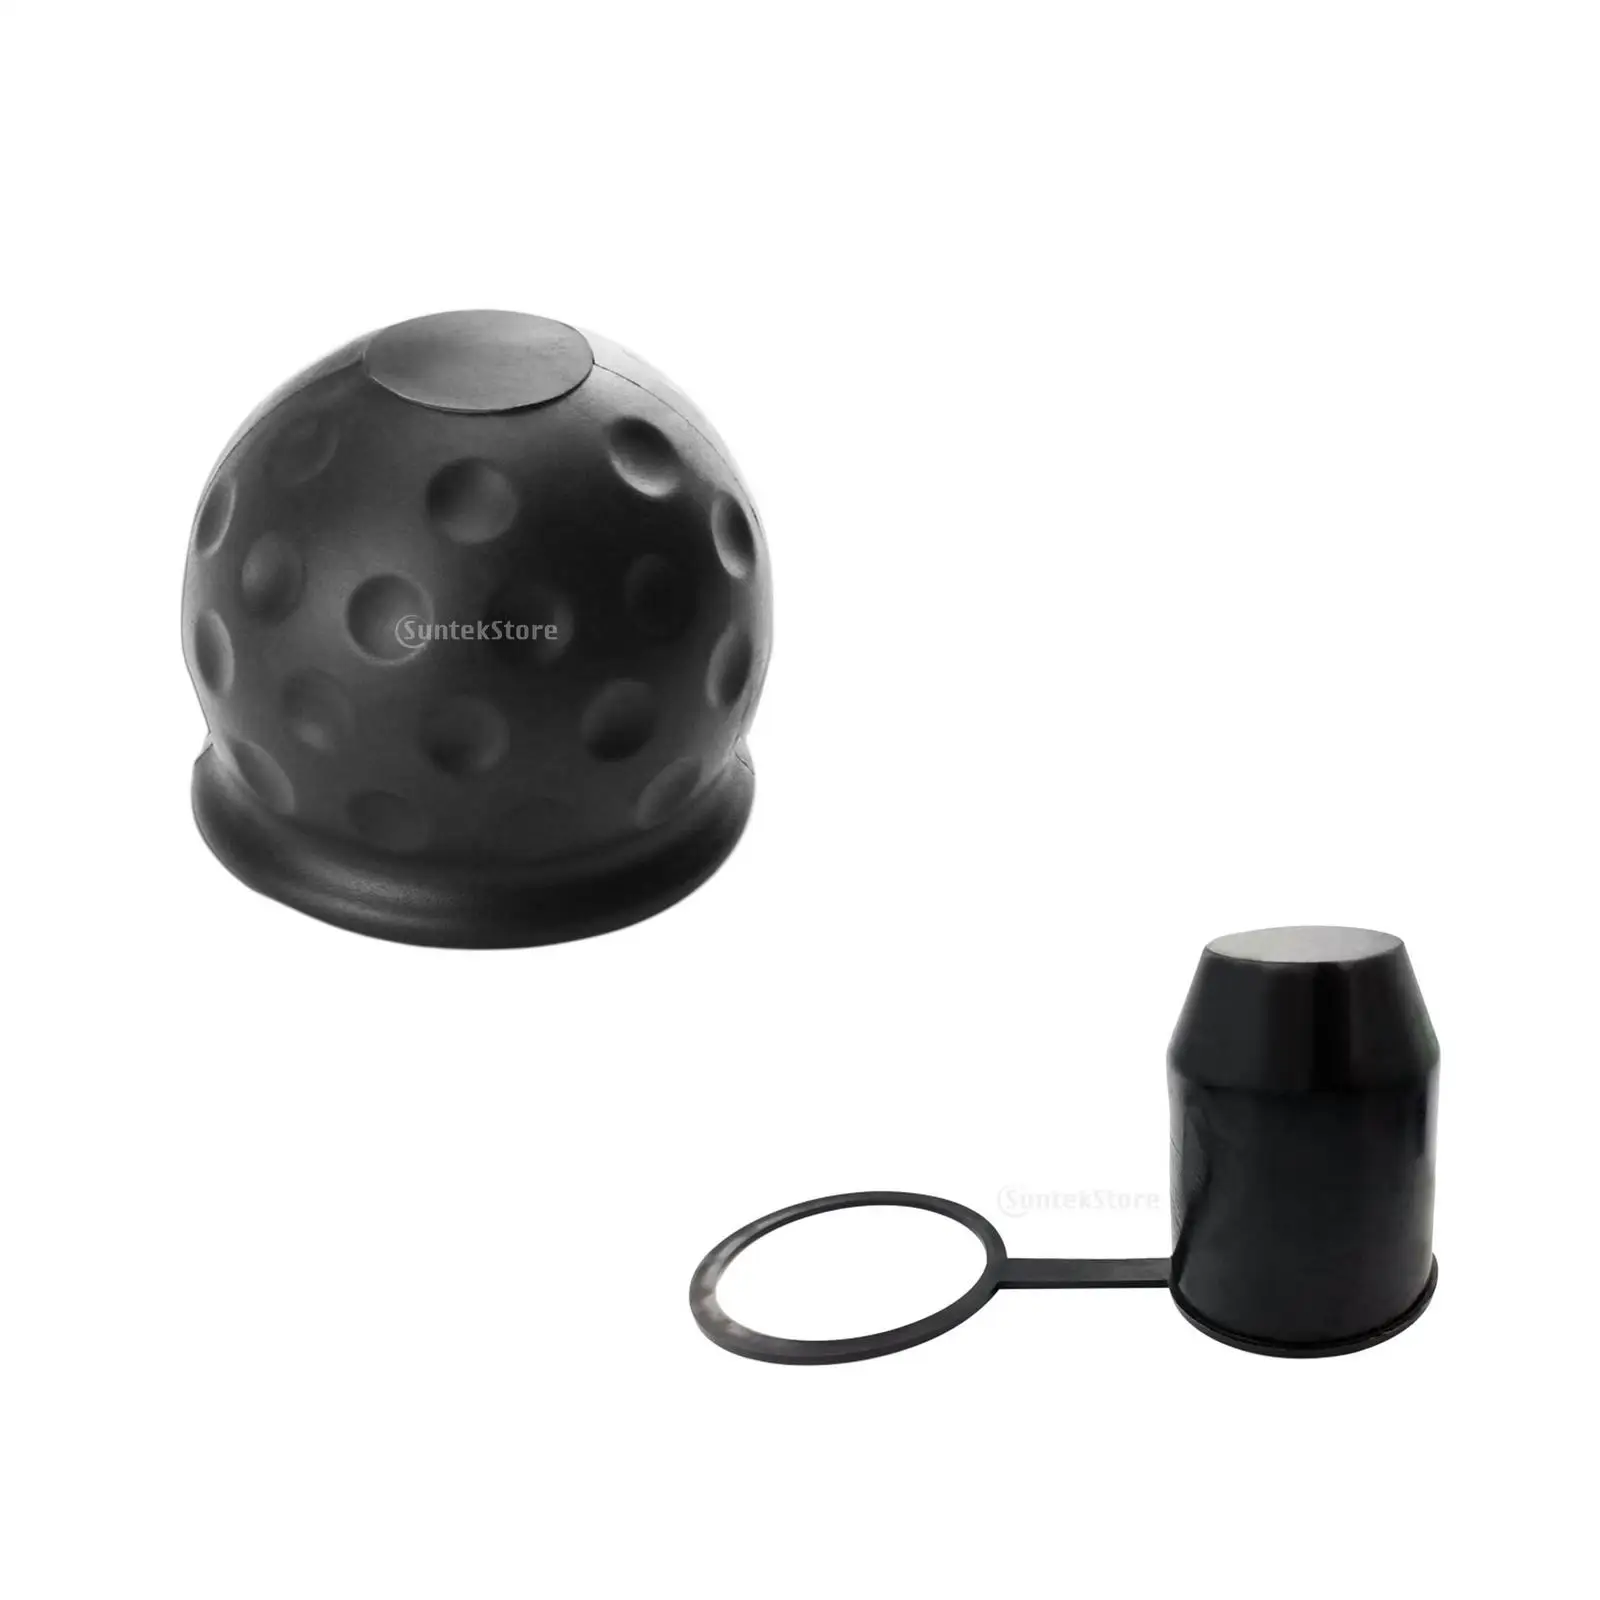 Towing Hitch  Caps Waterproof for RV,  Professional Accessories